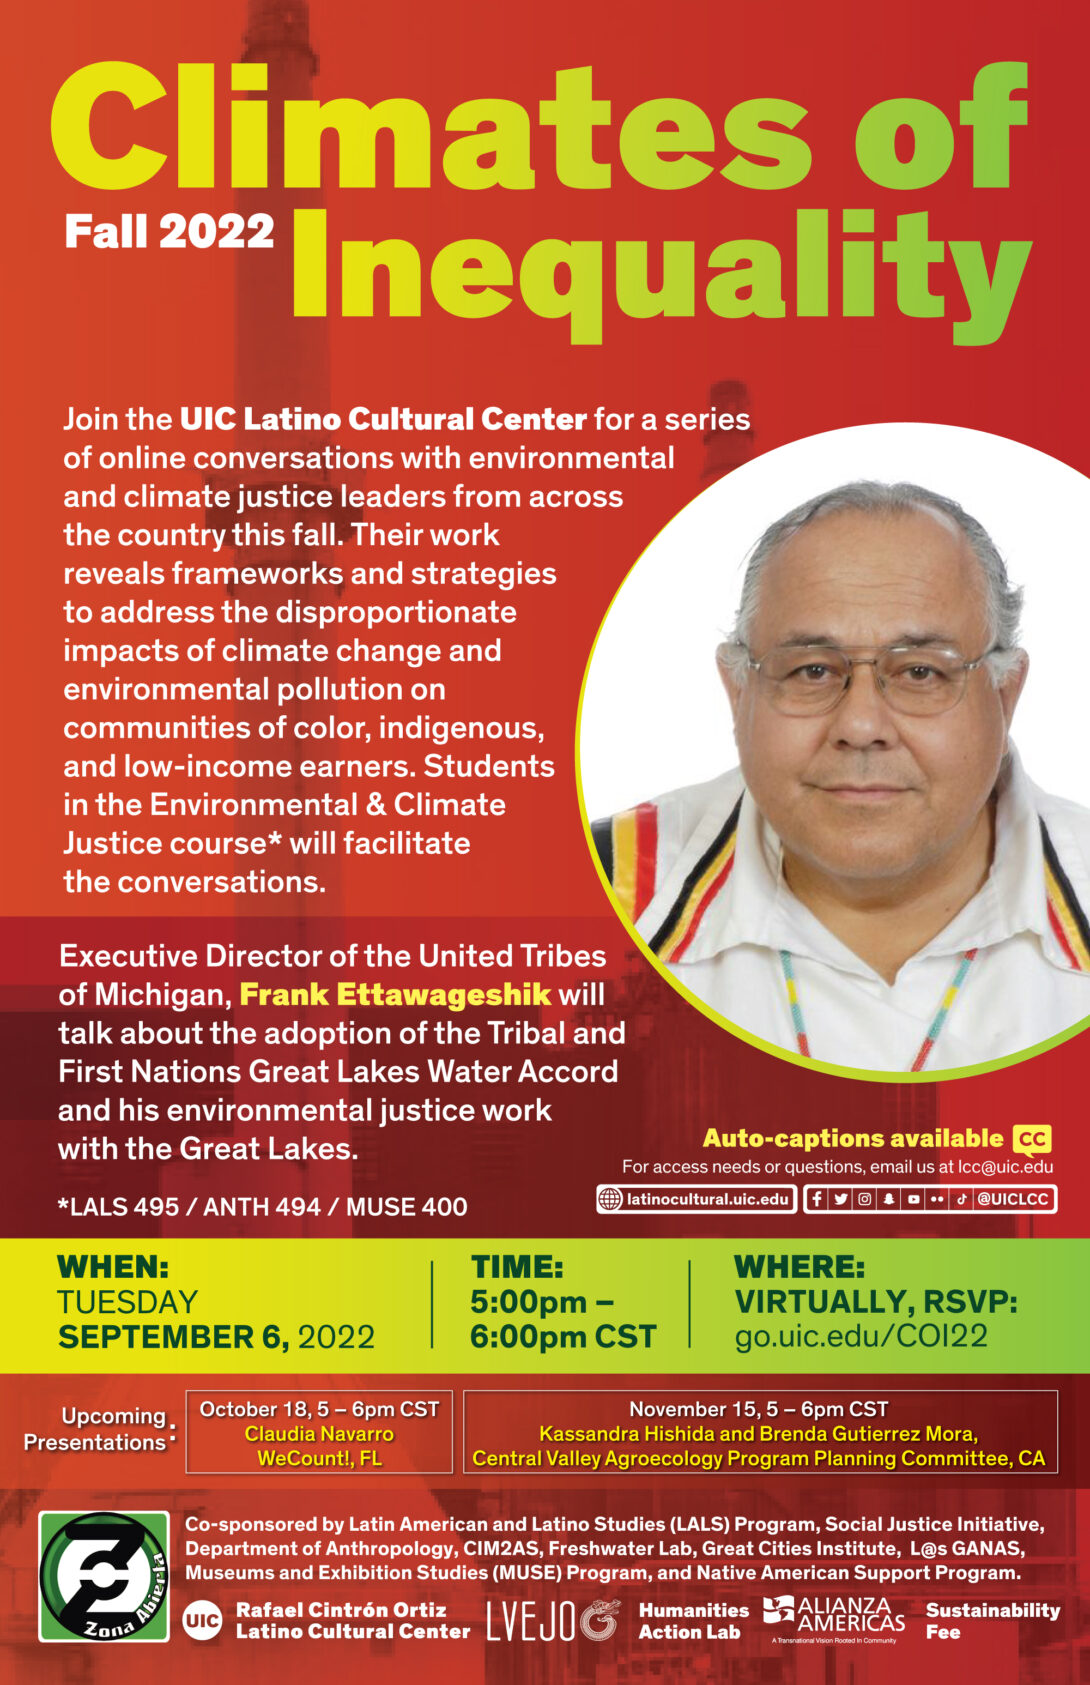 Red background with smokestack image. Neon green title on top read Climates of Inequality. White Text in the middle of the page has a poster description. To the right of the page there’s an image of the guest speaker. He has gray hair, wears glasses and is wearing a white shirt with three color stripes on each side of the collar. The colors are black, yellow, and red. He is wearing an indigenous necklace.